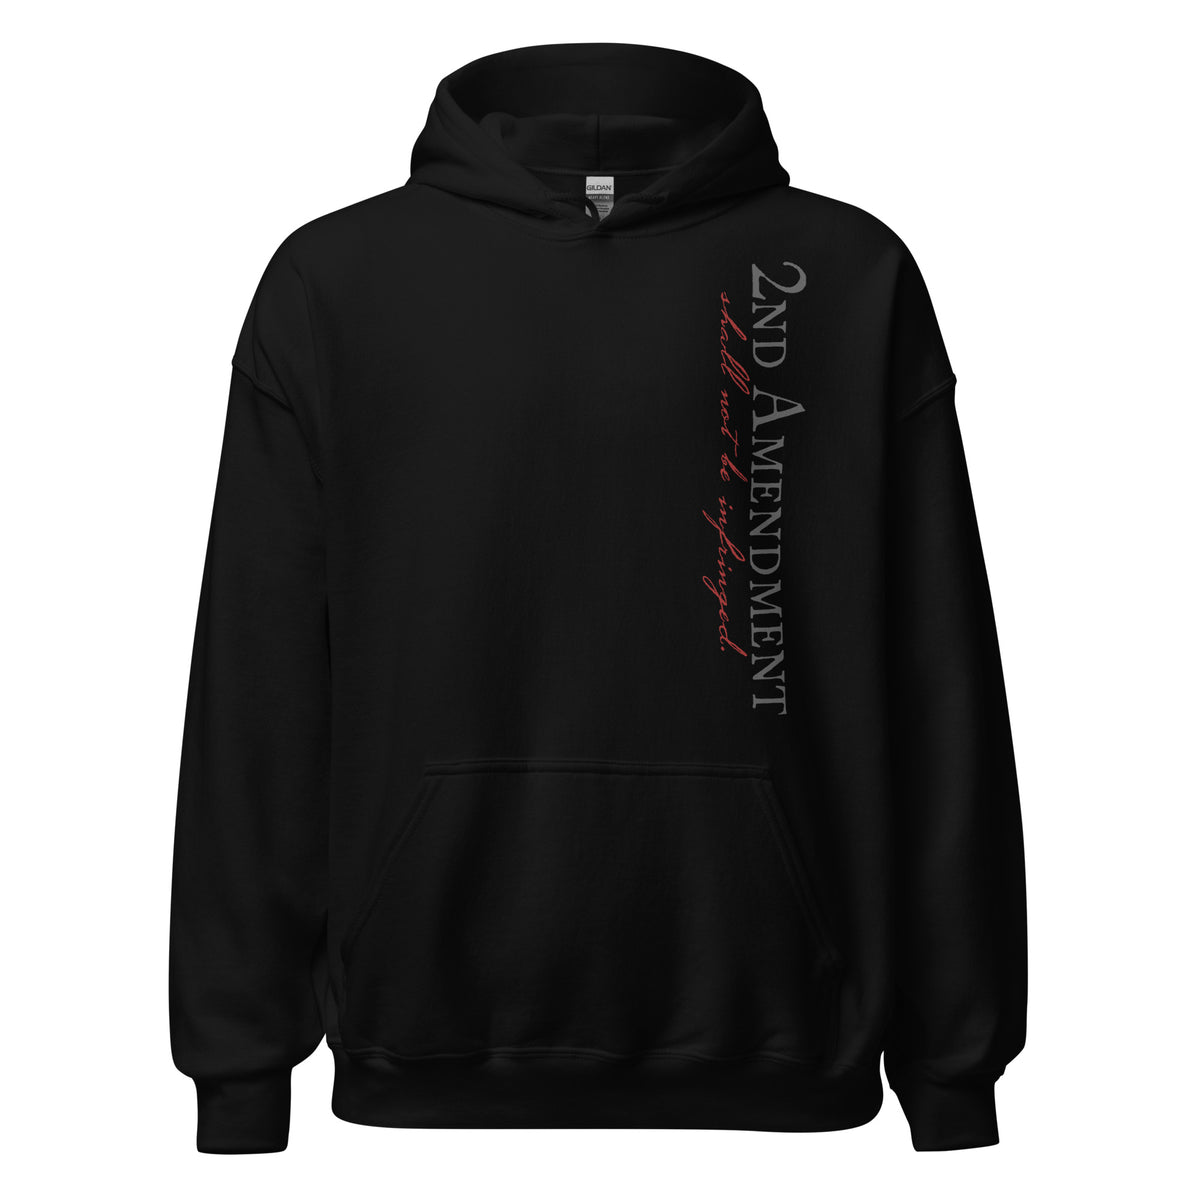 The Bill of Rights 2A Onyx Hoodie